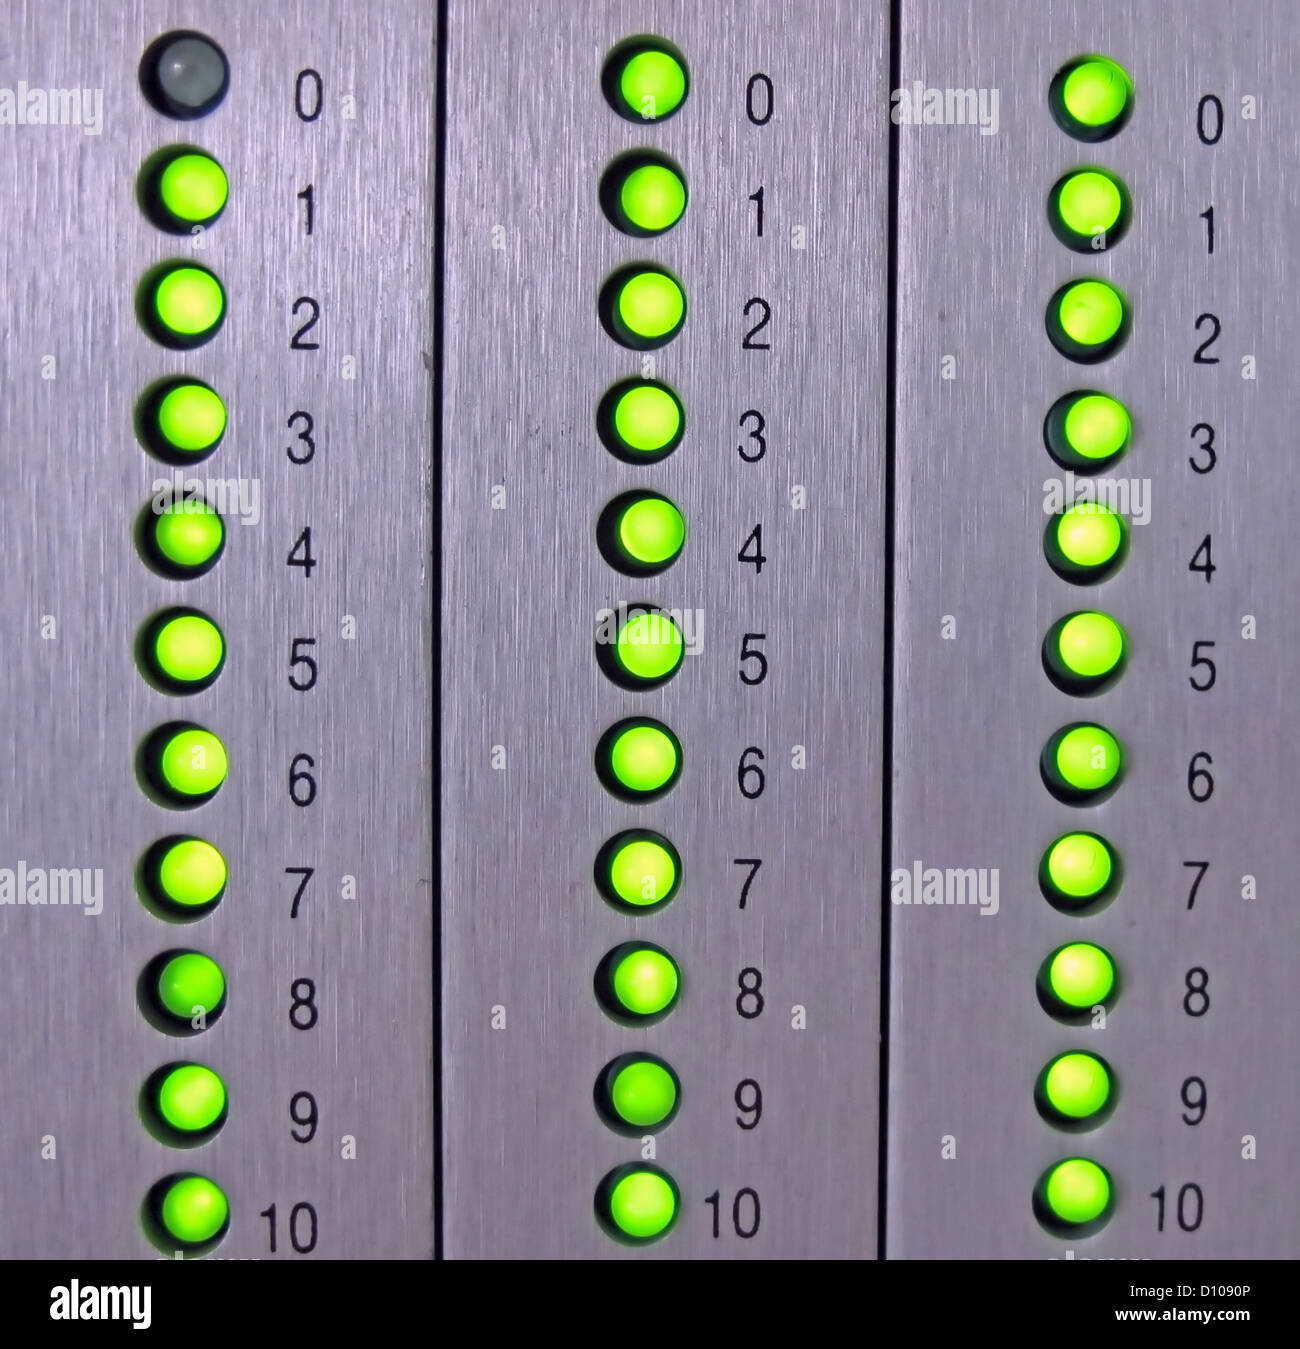 steel Panel with led lights green and screen printed numbers Stock Photo